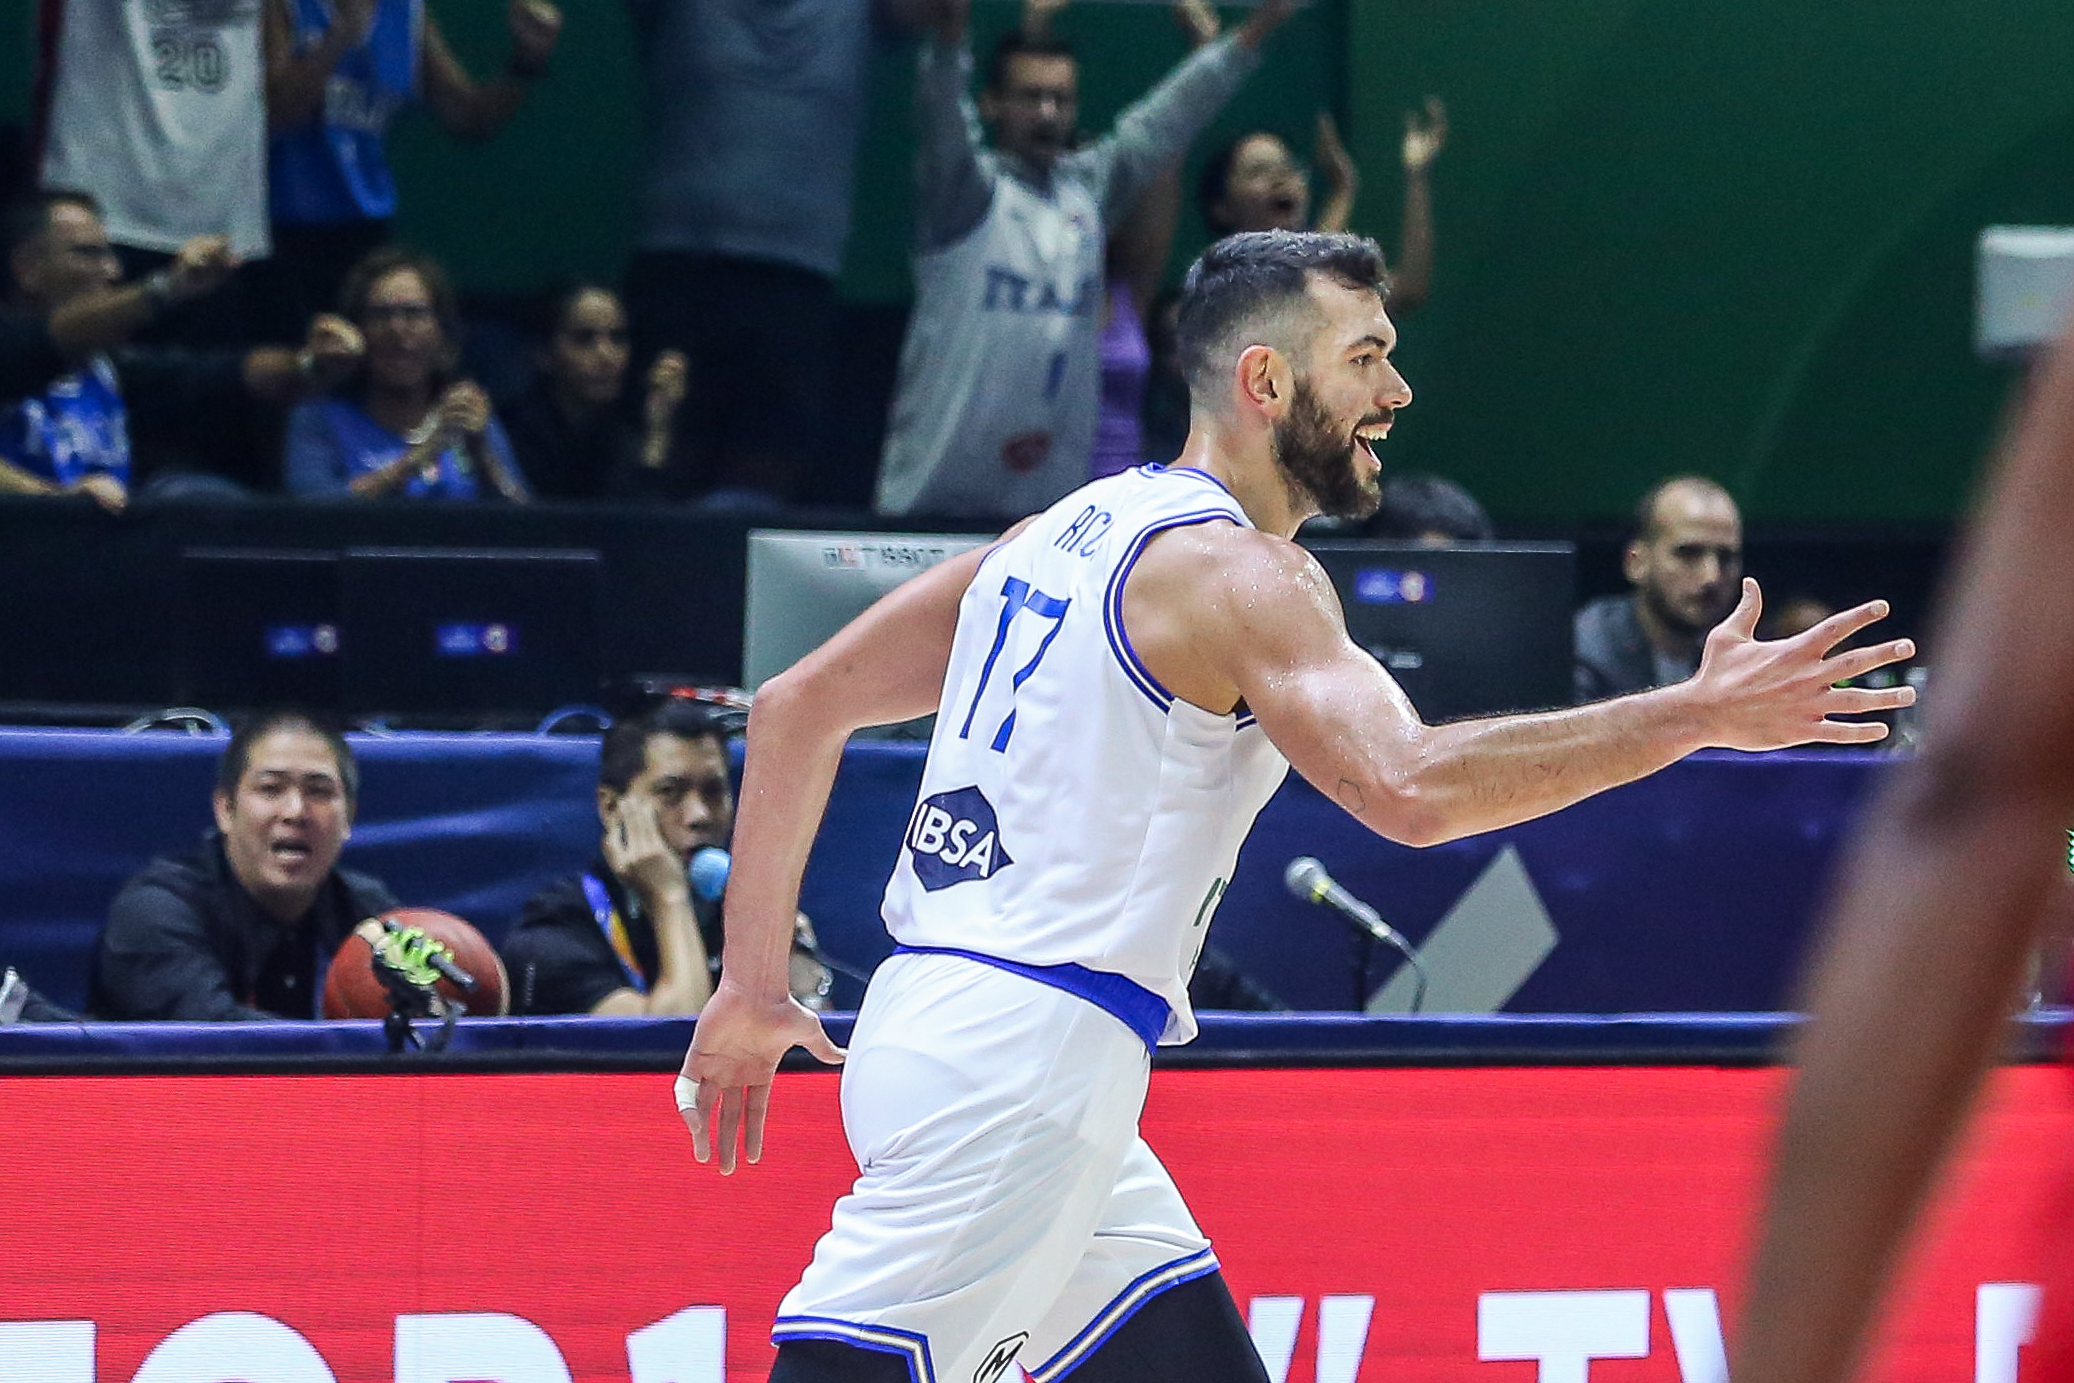 Italy's Giampaolo Ricci in the Fiba World Cup. 